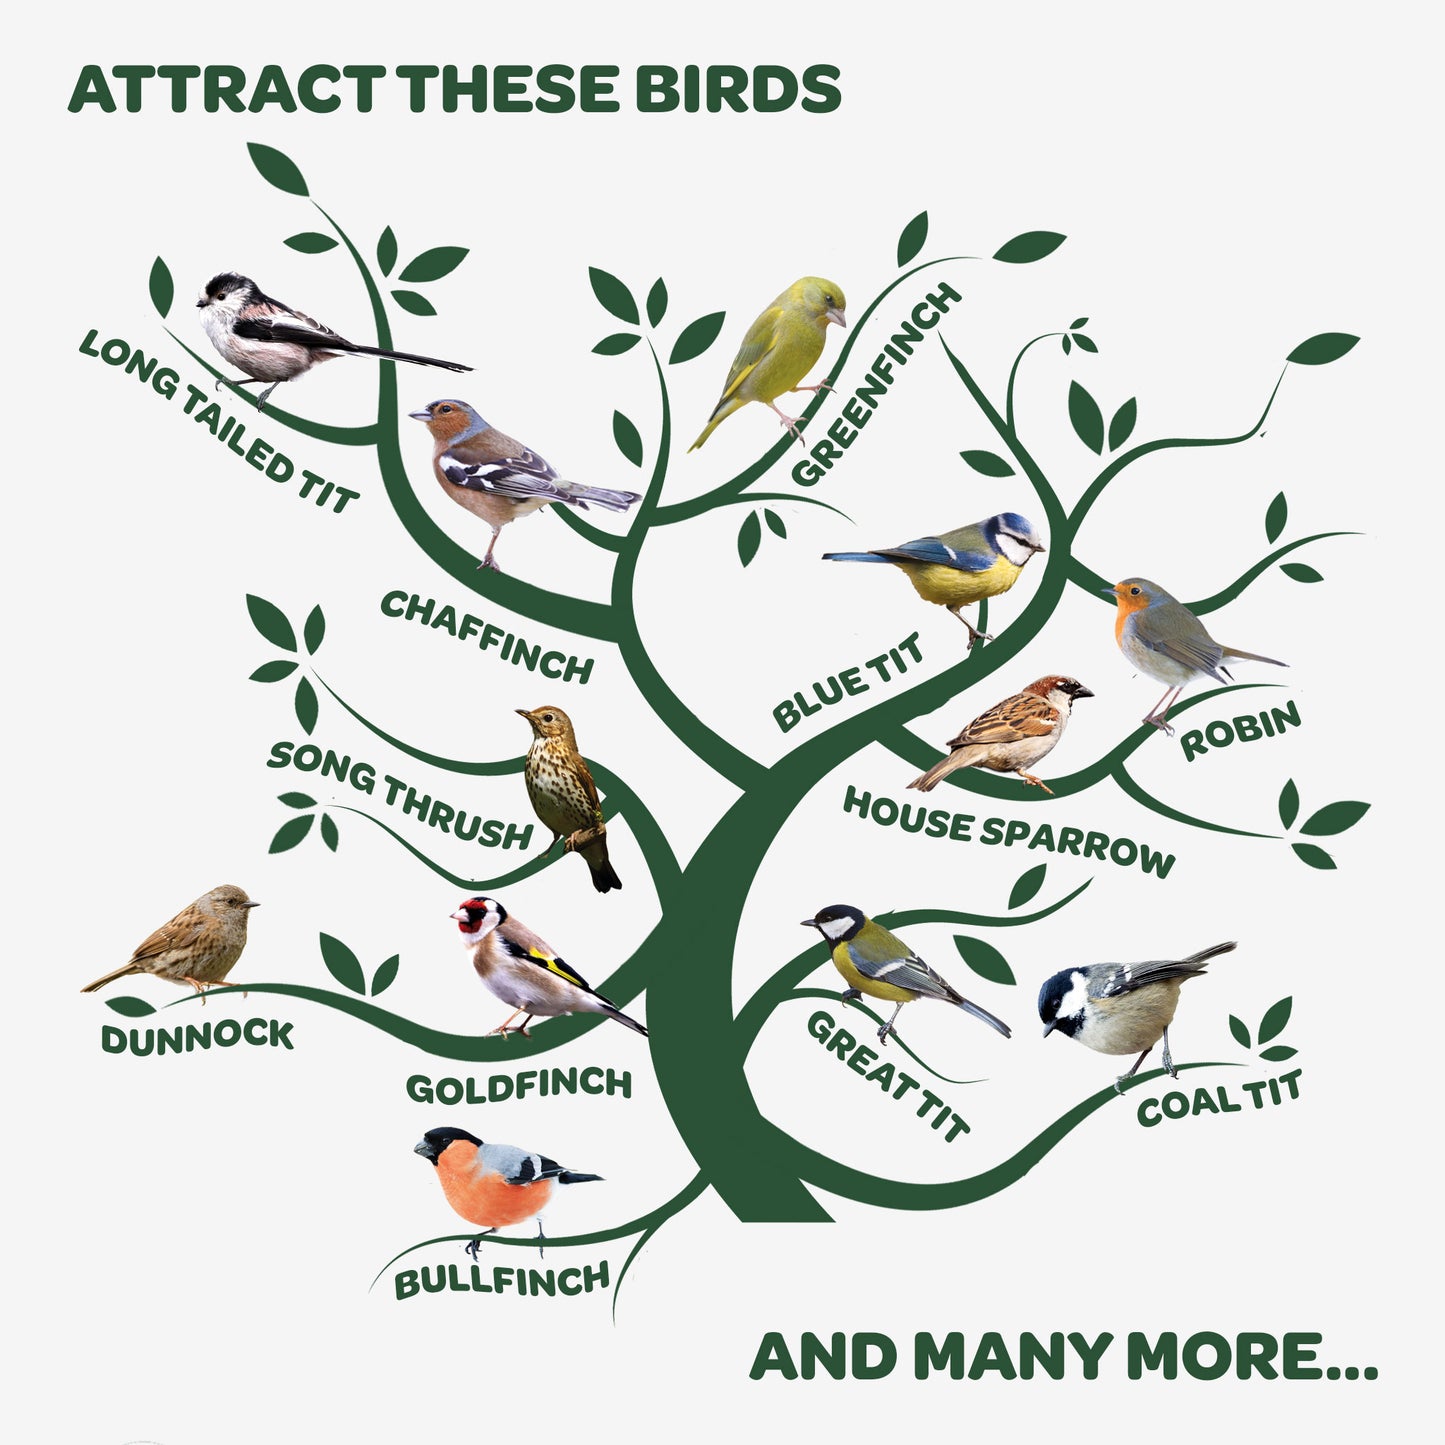 Peckish Sunflower Hearts attracts these birds infographic